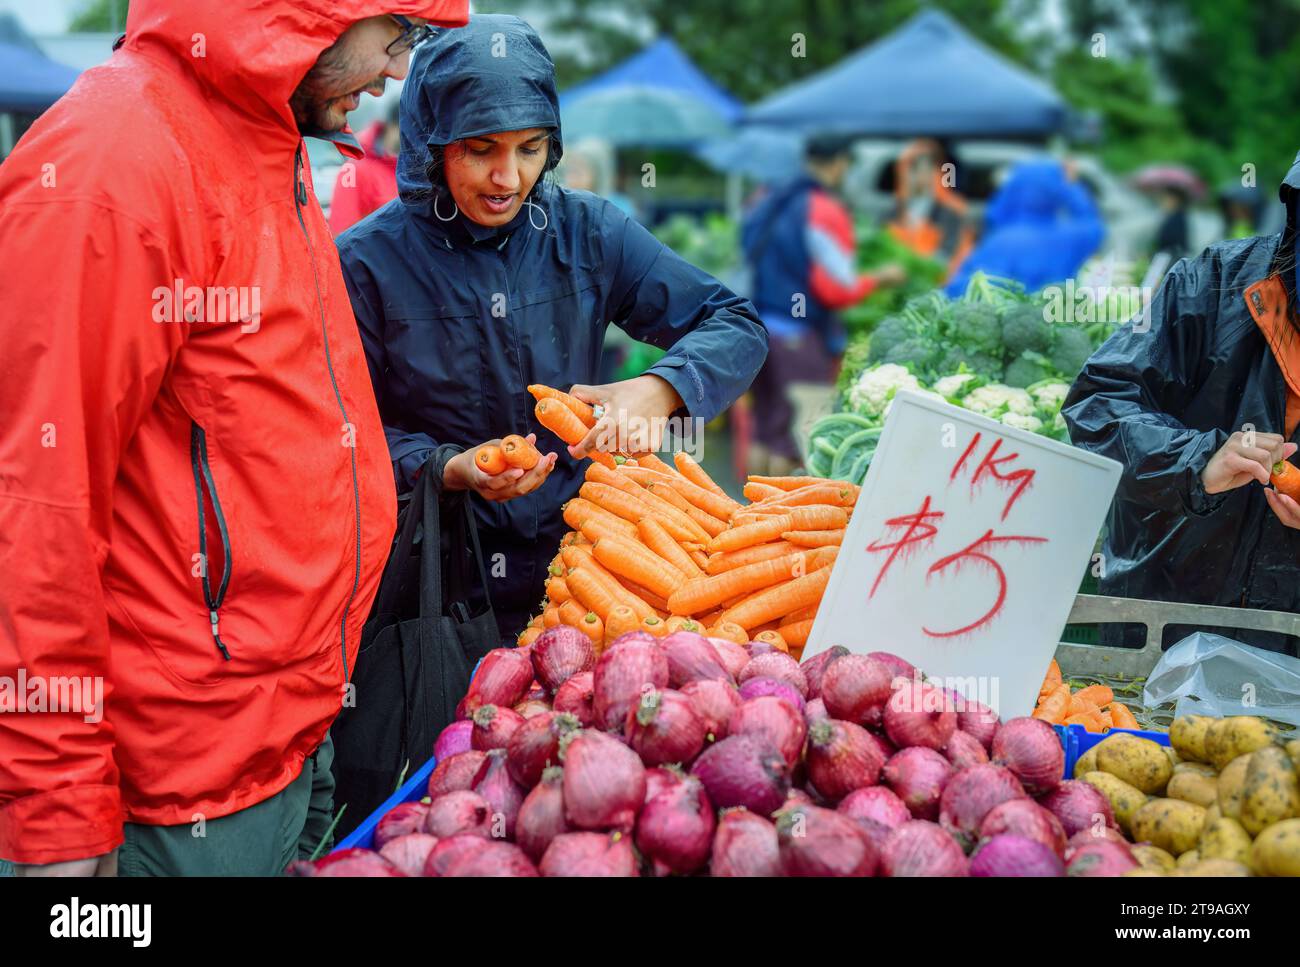 Couple choosing carrots in the market stalls in the rain. Unrecognizable people buying vegetables in the background. Stock Photo